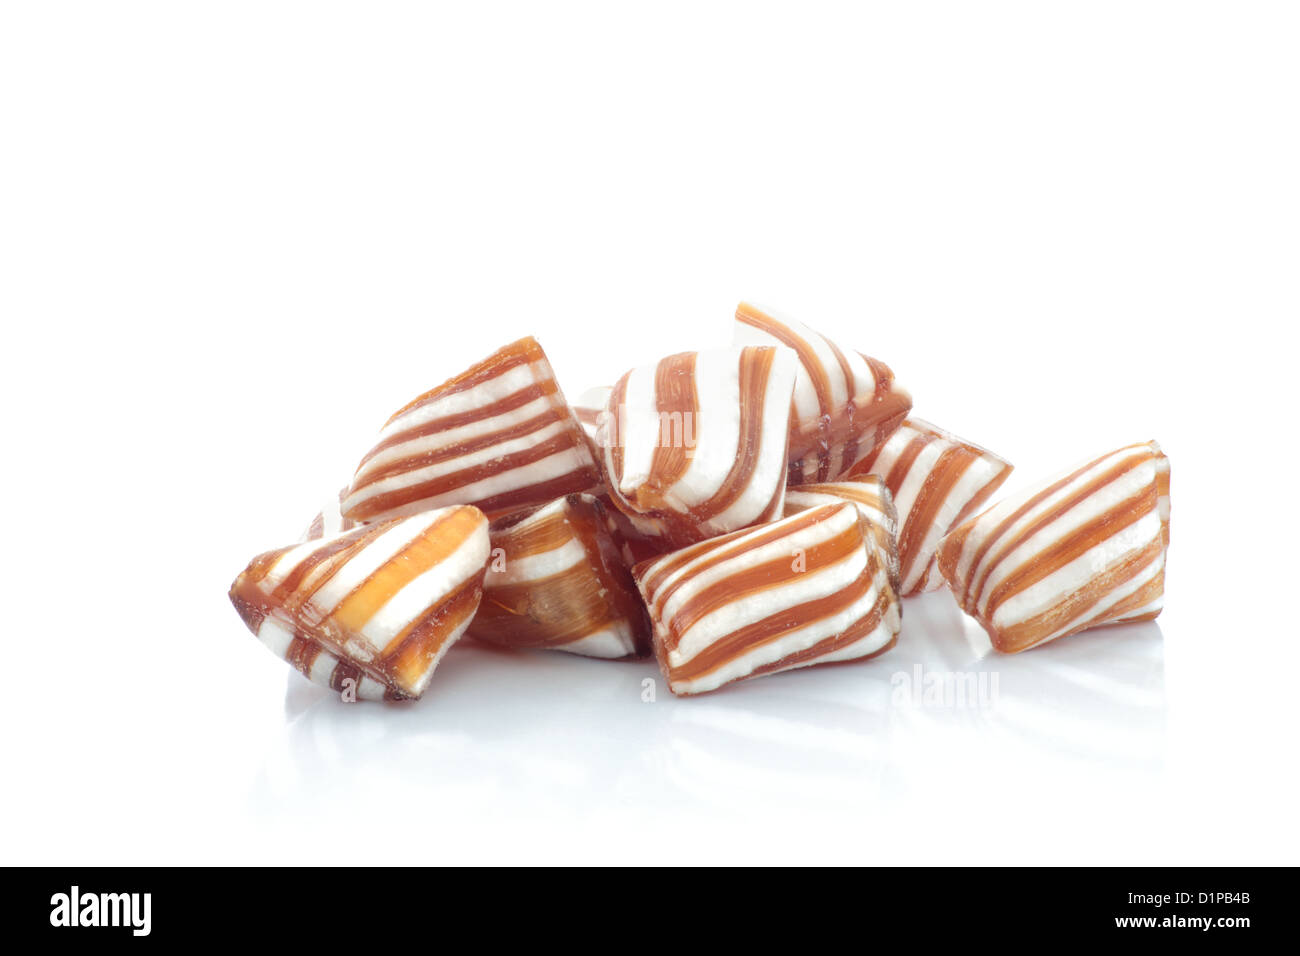 Striped humbugs isolated on a white background. Stock Photo